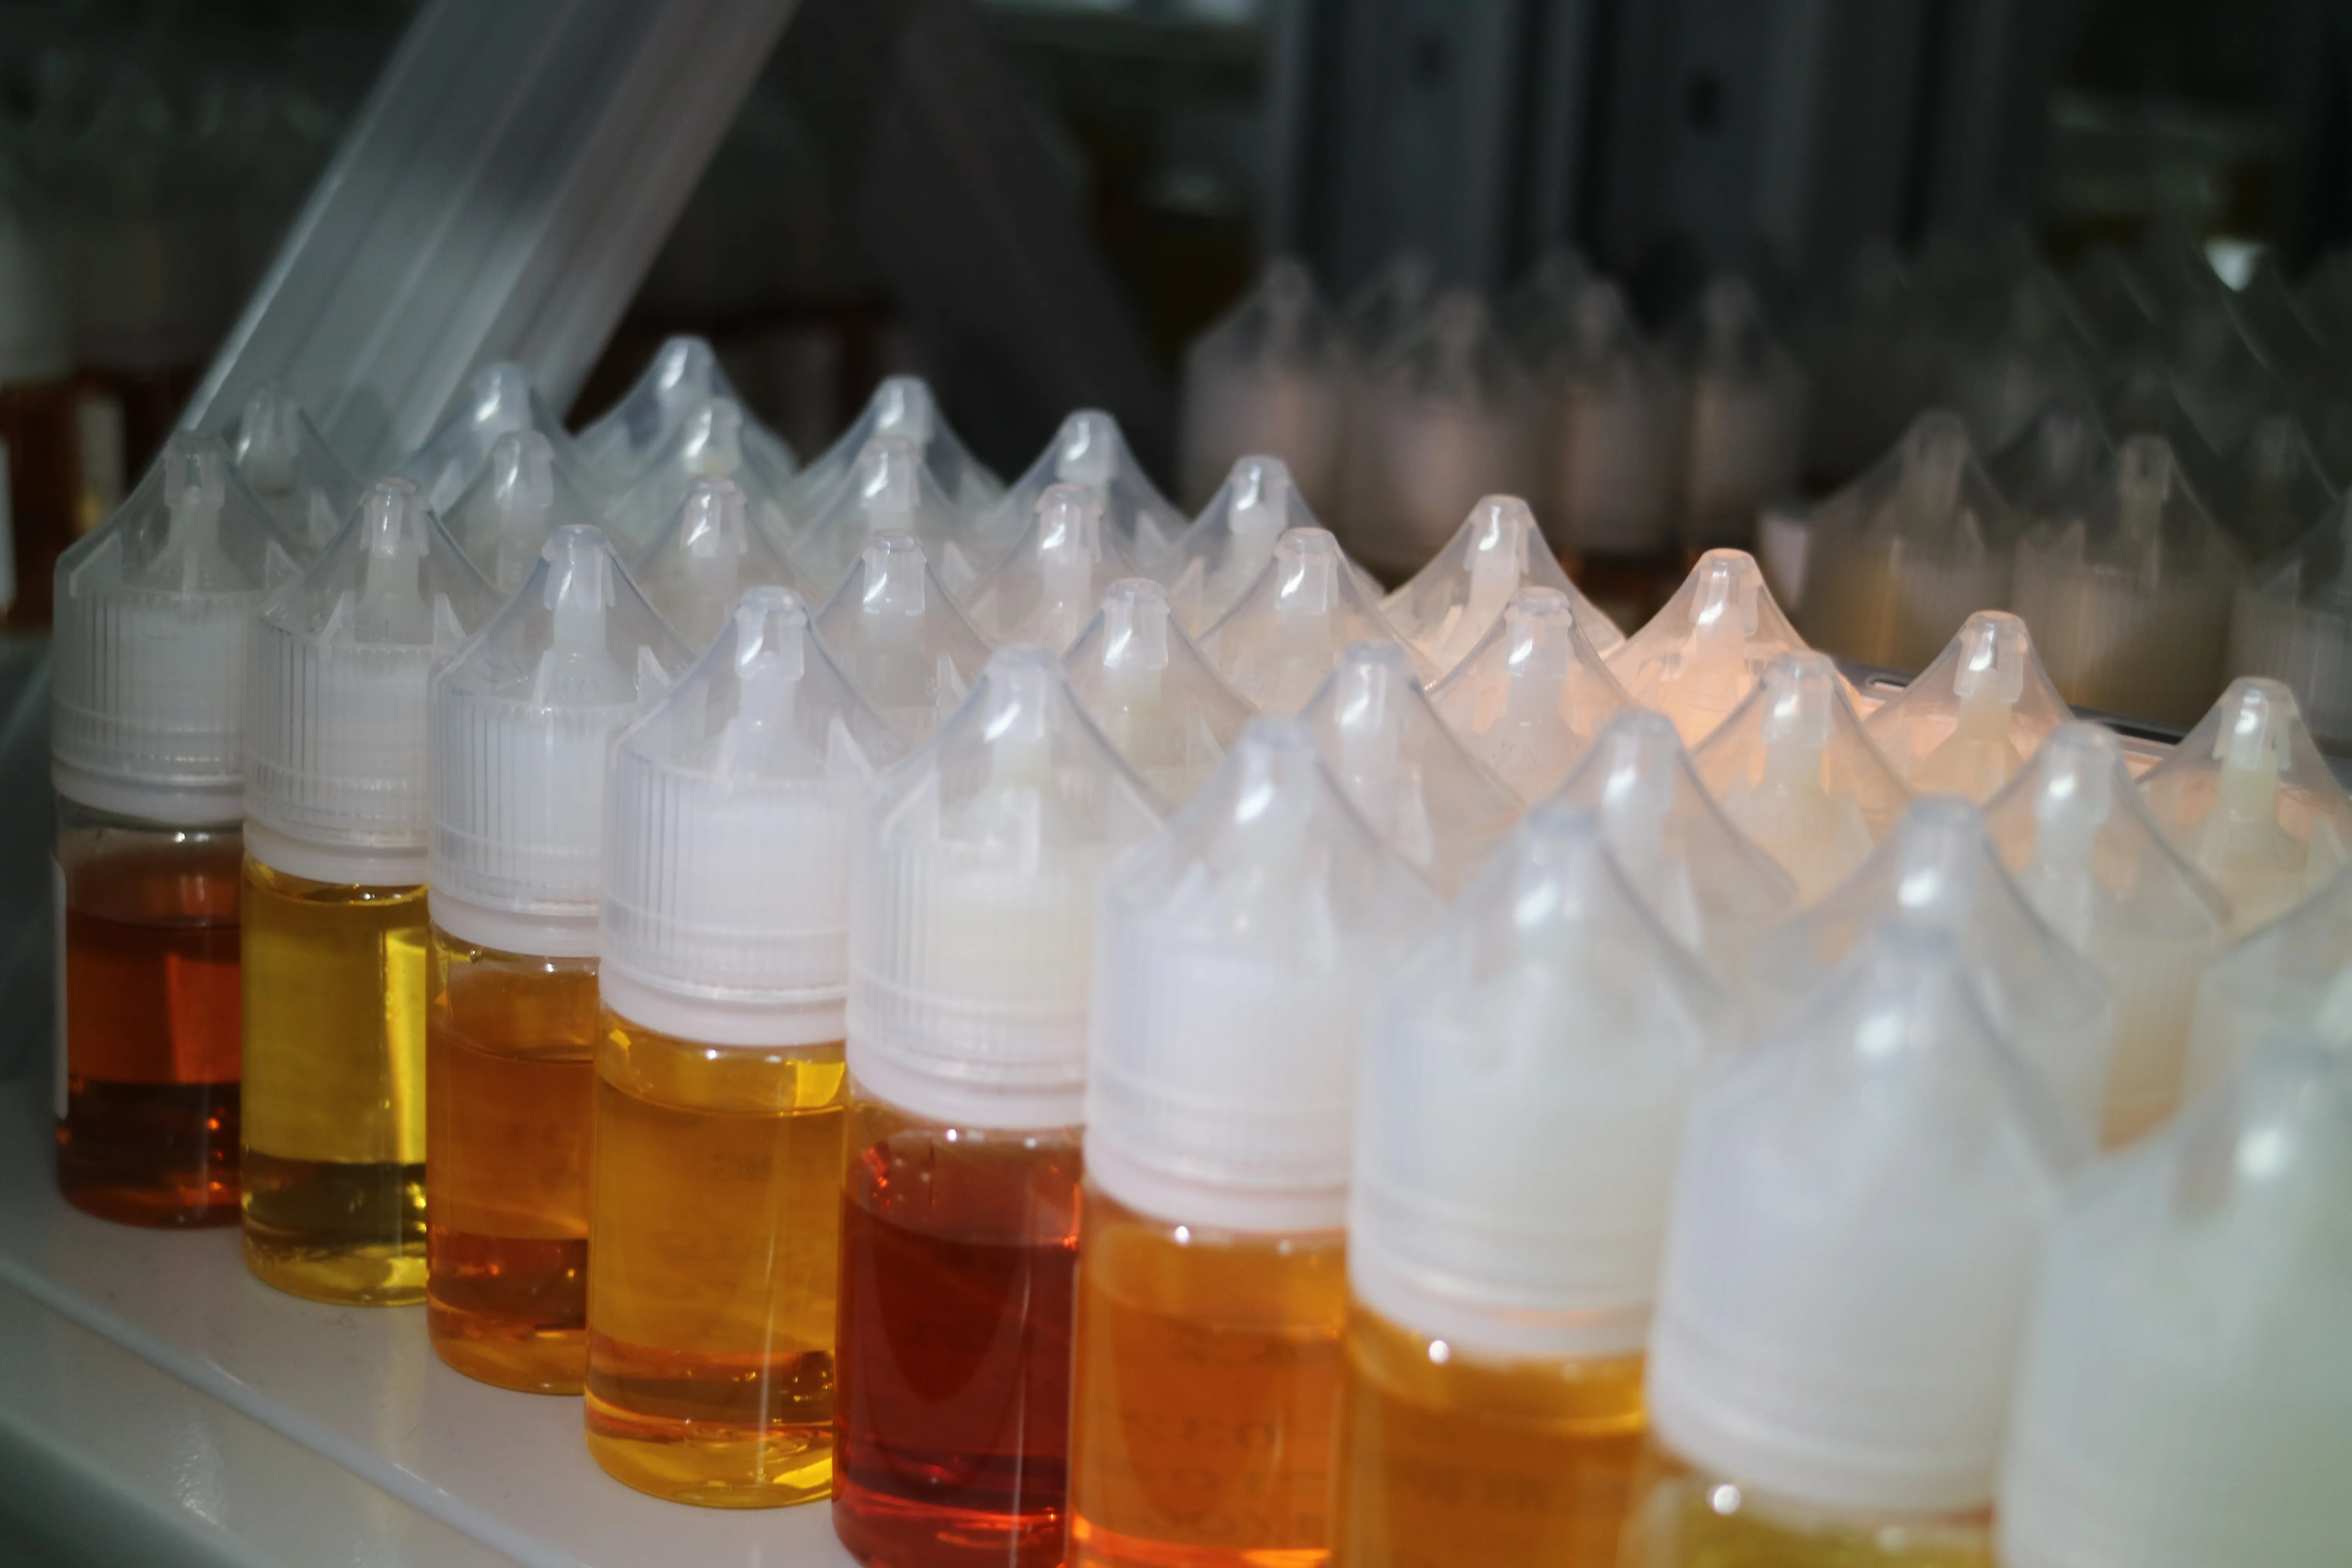 Zinwi - Does ejuice contain formaldehyde